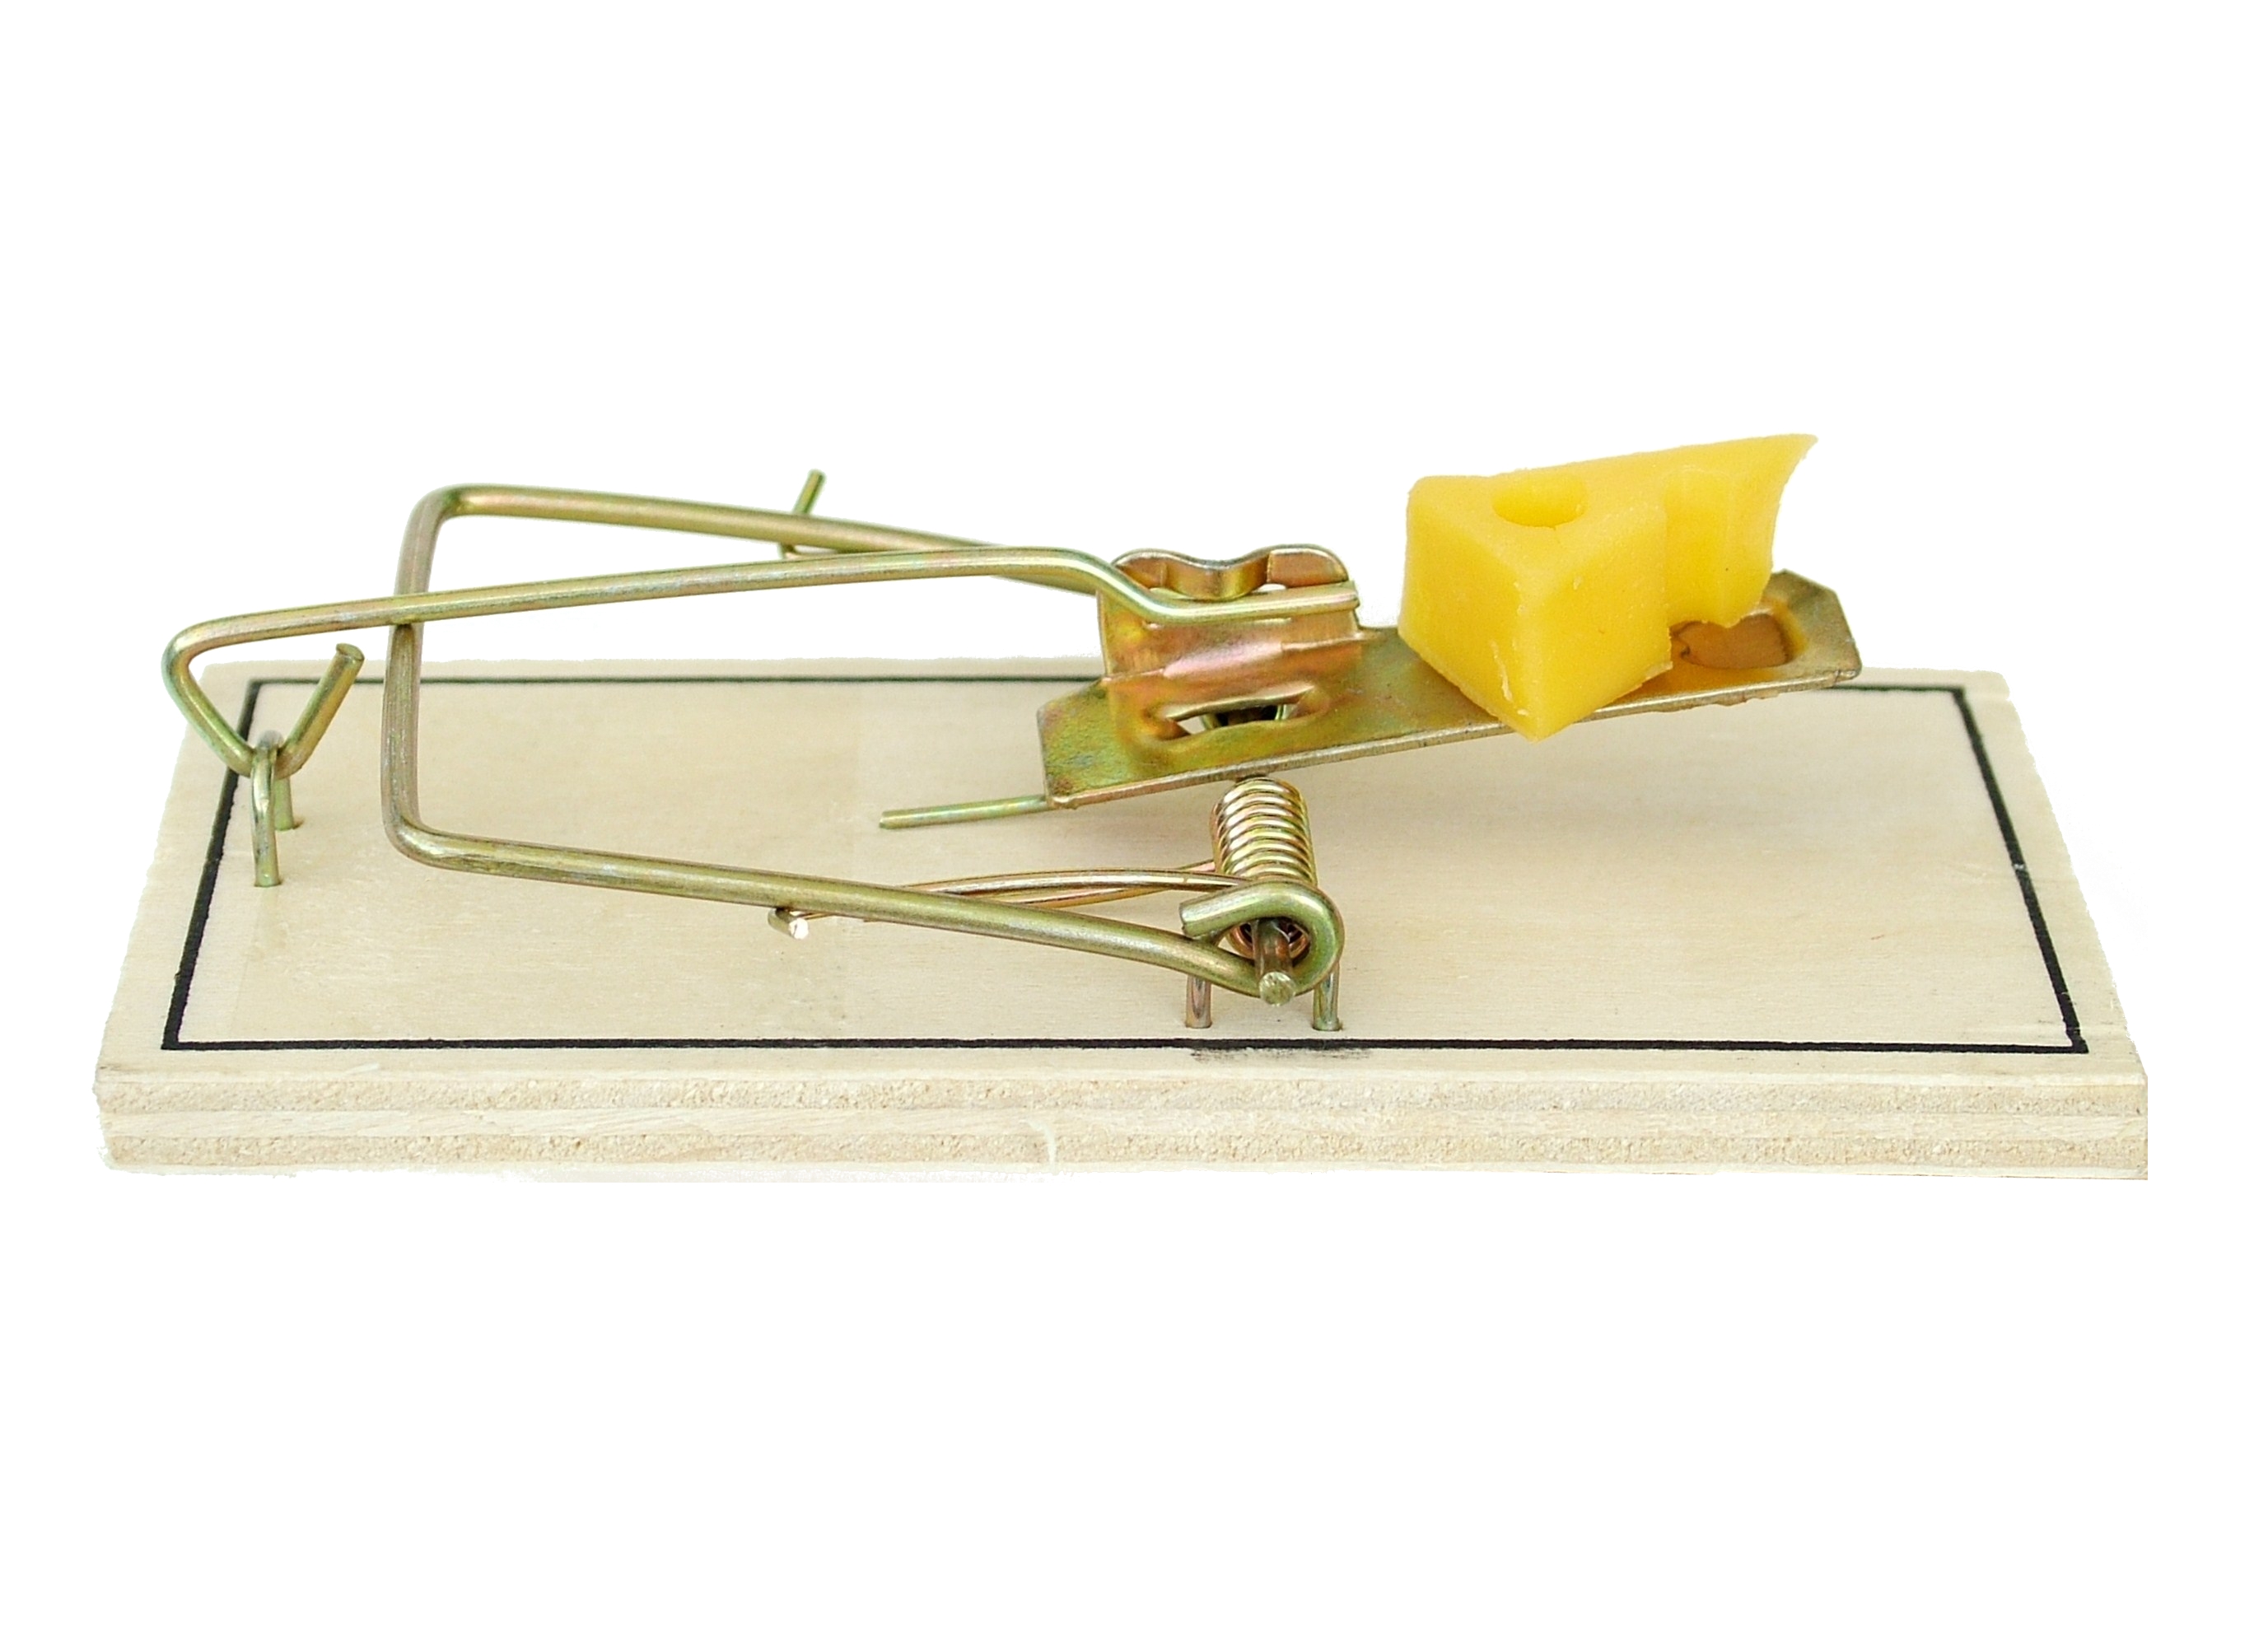 Photo of a rat trap loaded for action with a piece of cheese on the trigger.